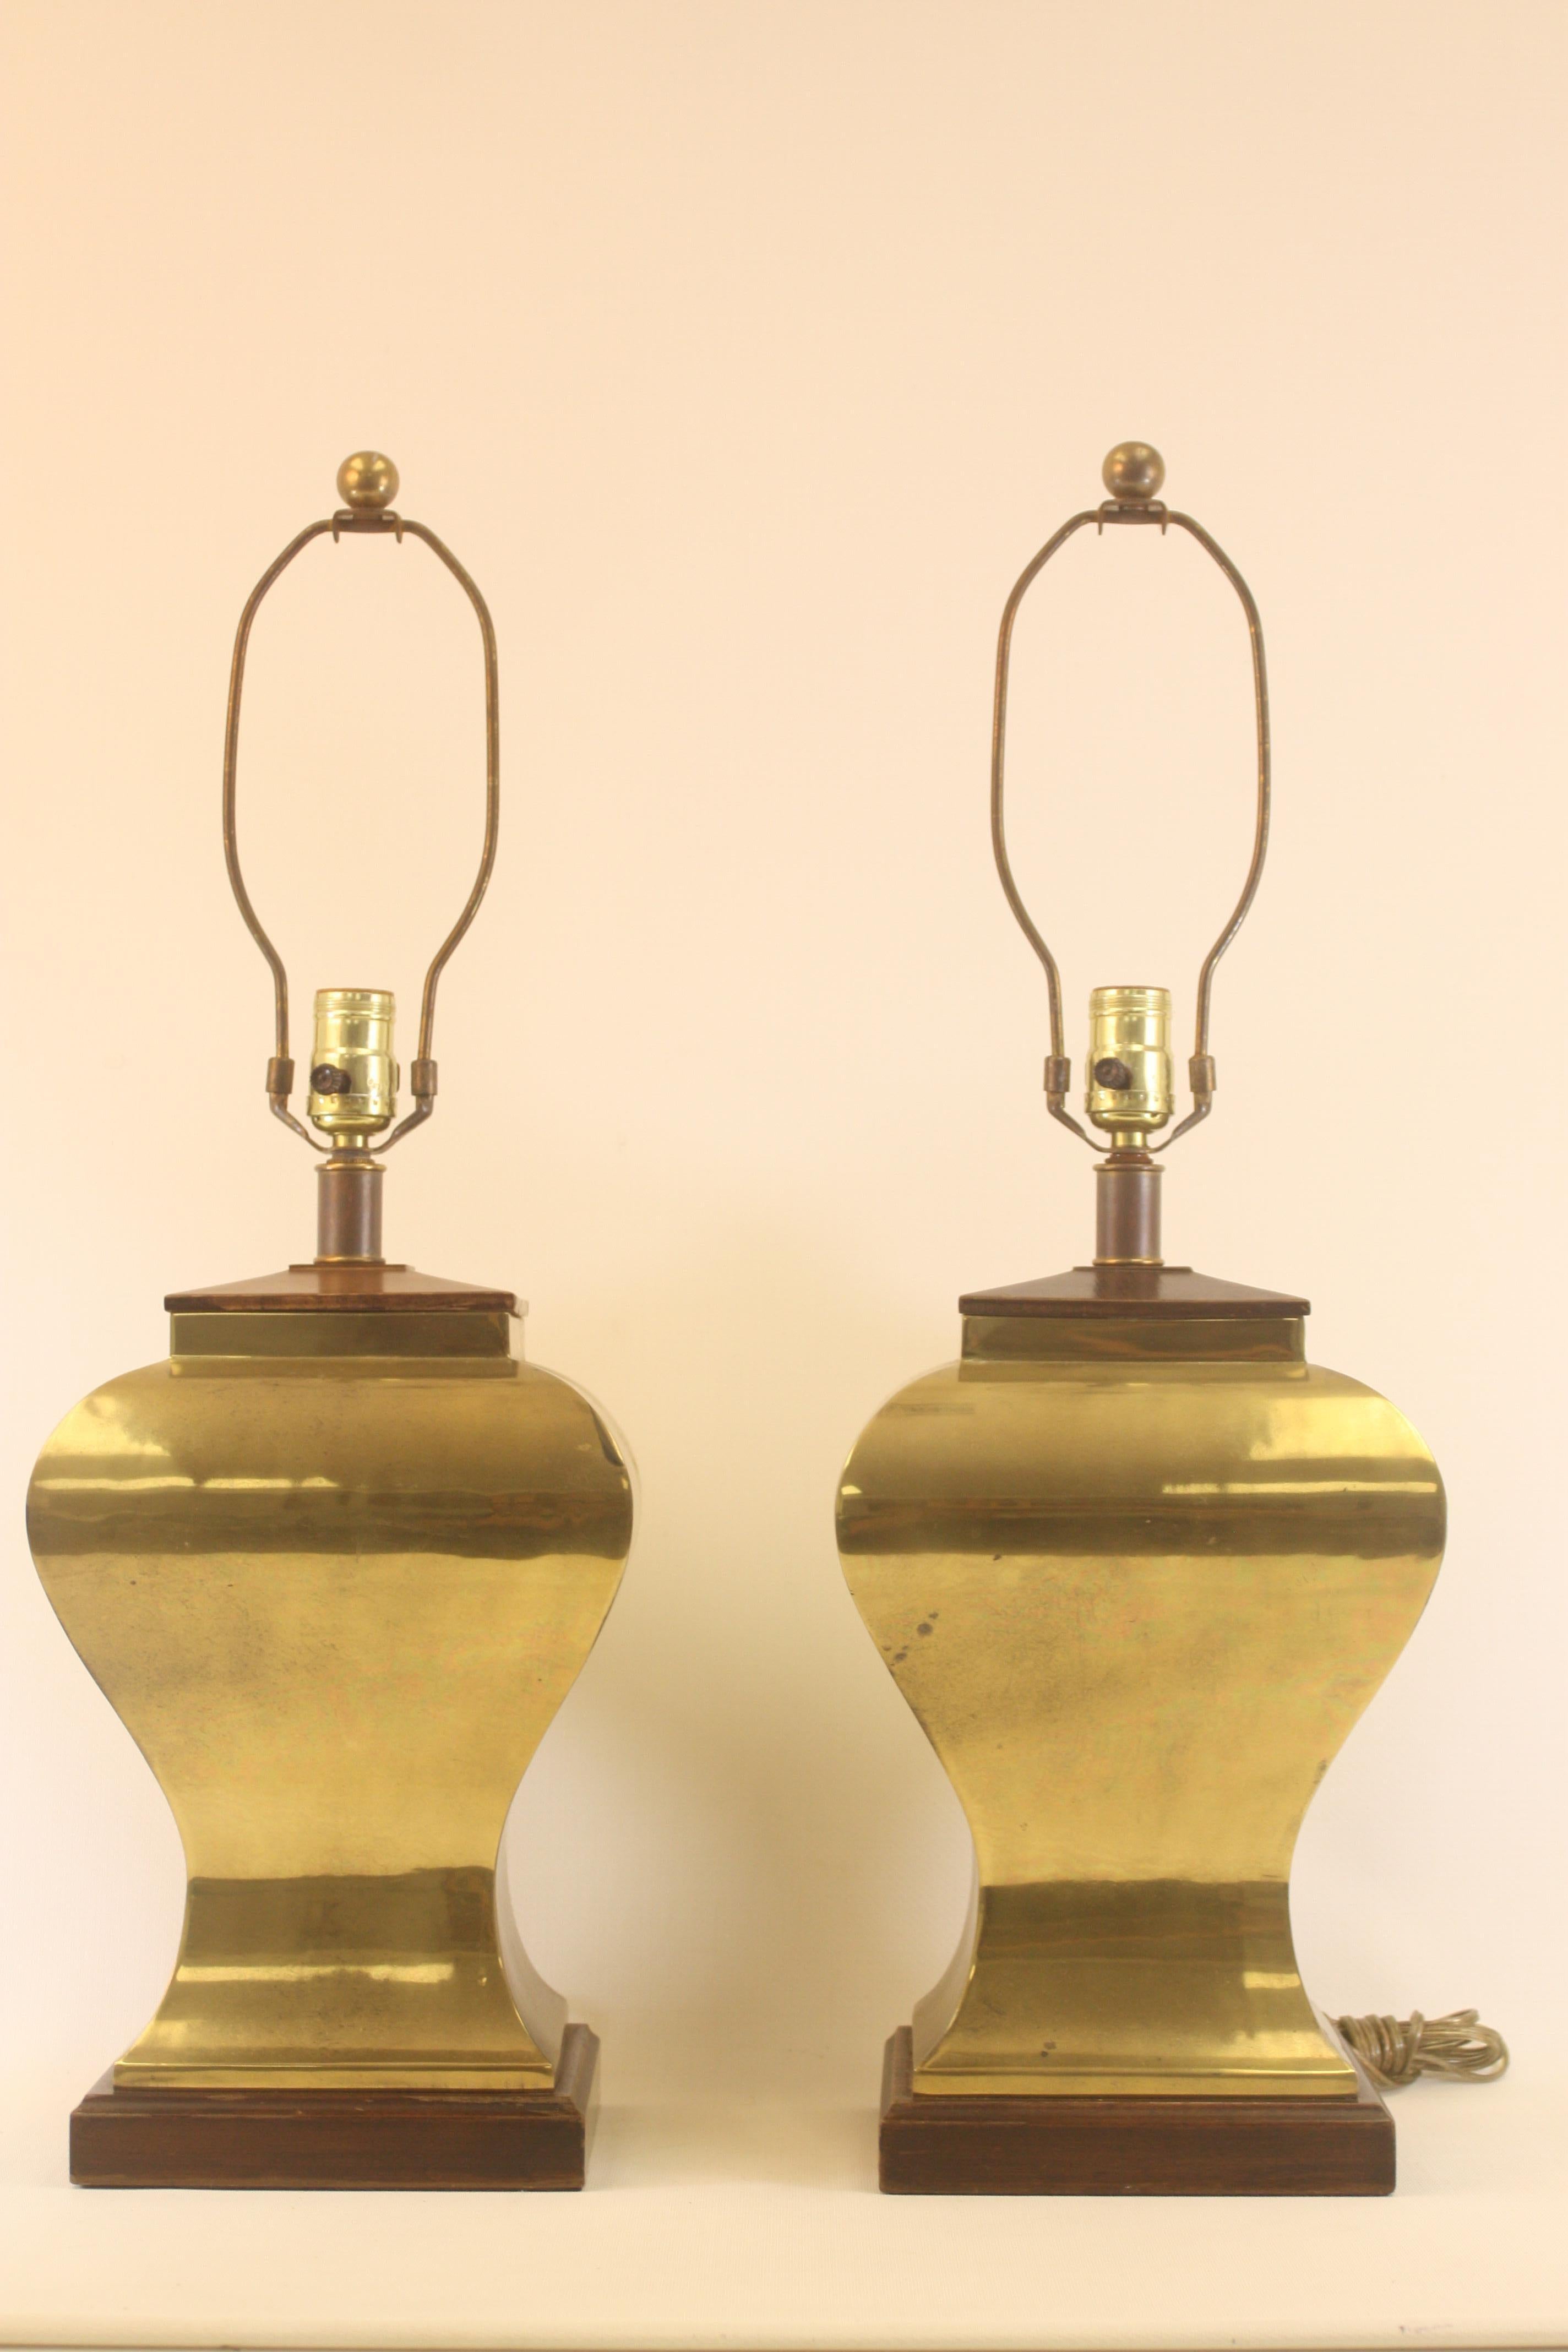 Pair of elegantly shaped brass and wood base lamps by Tyndale.  The total height to the tip of the finial is 26.5'' and the height to the bulb receptacle is: 18.5'' The width is about 9''.
These are very classical and would look great in a modern or